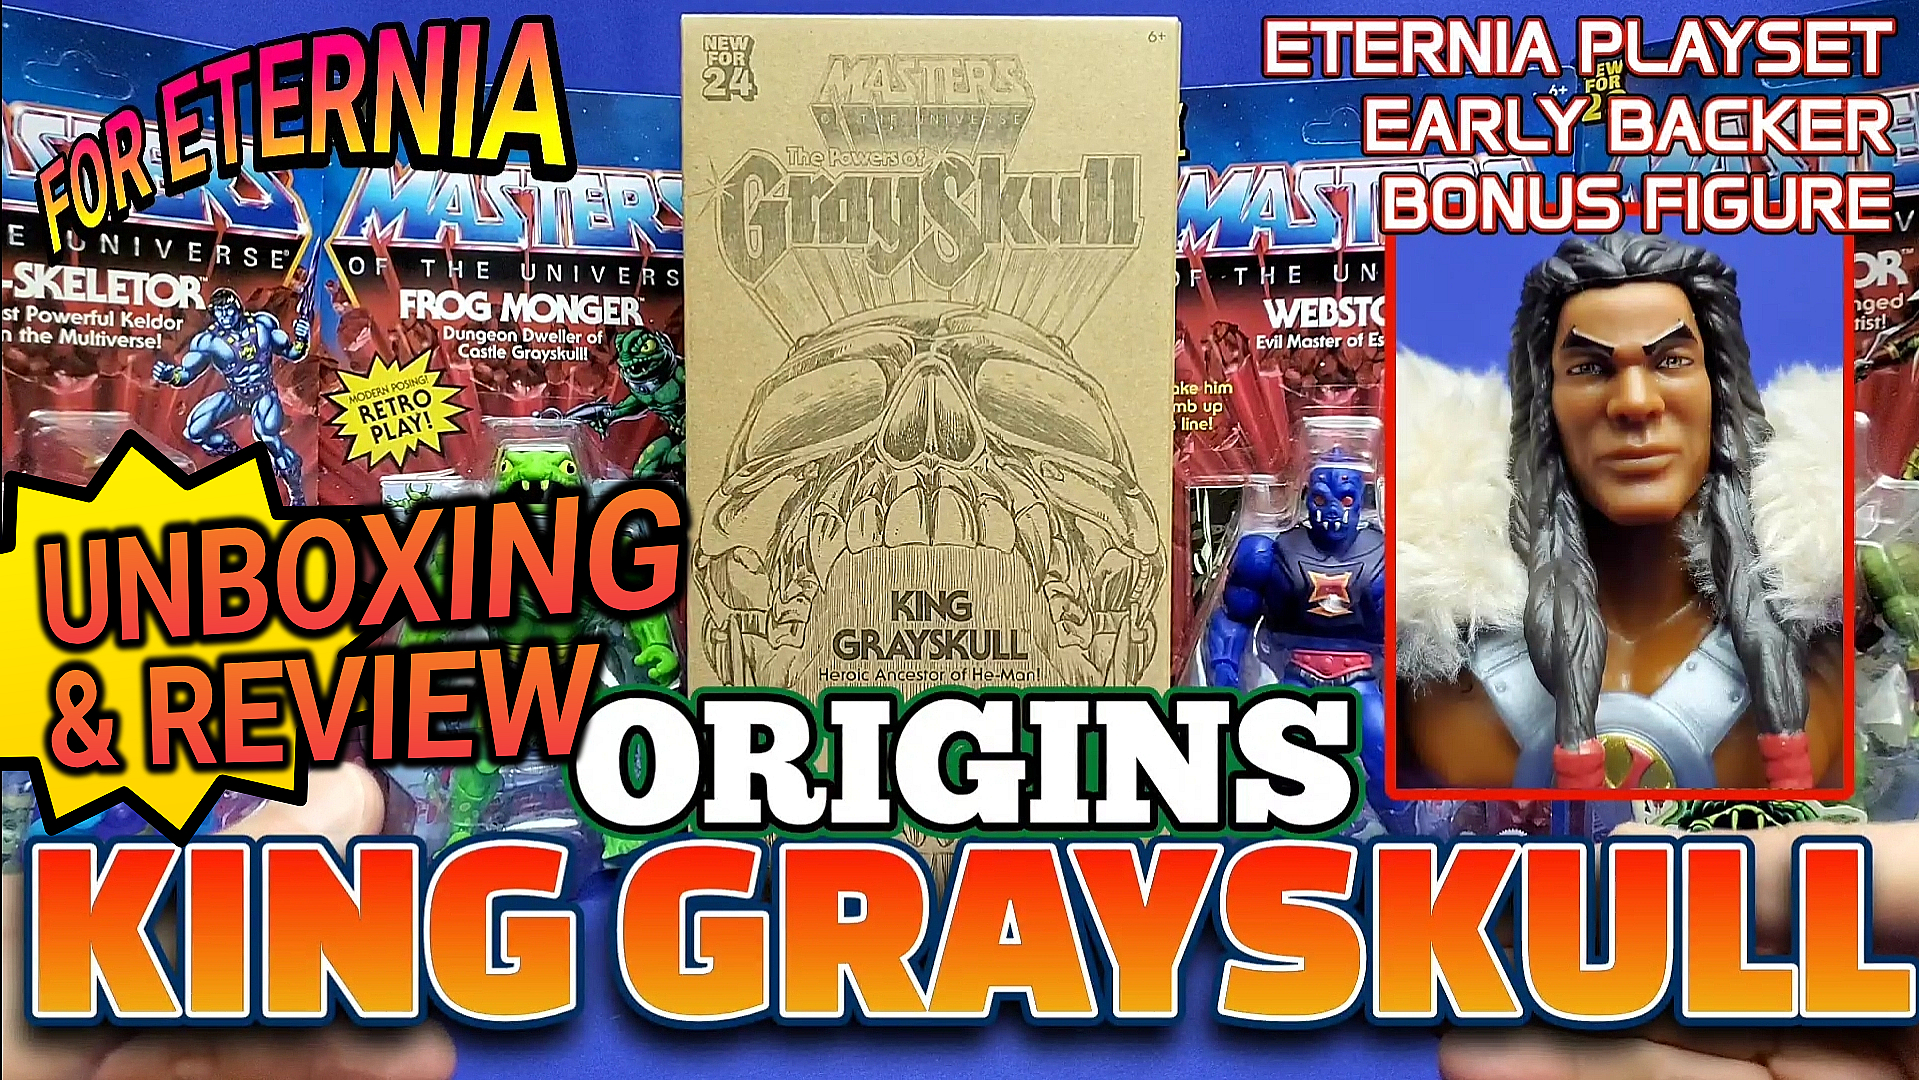 UNBOXING & REVIEW: The Eternia Playset ”Early Backer Bonus” KING GRAYSKULL Masters of the Universe Origins Action Figure